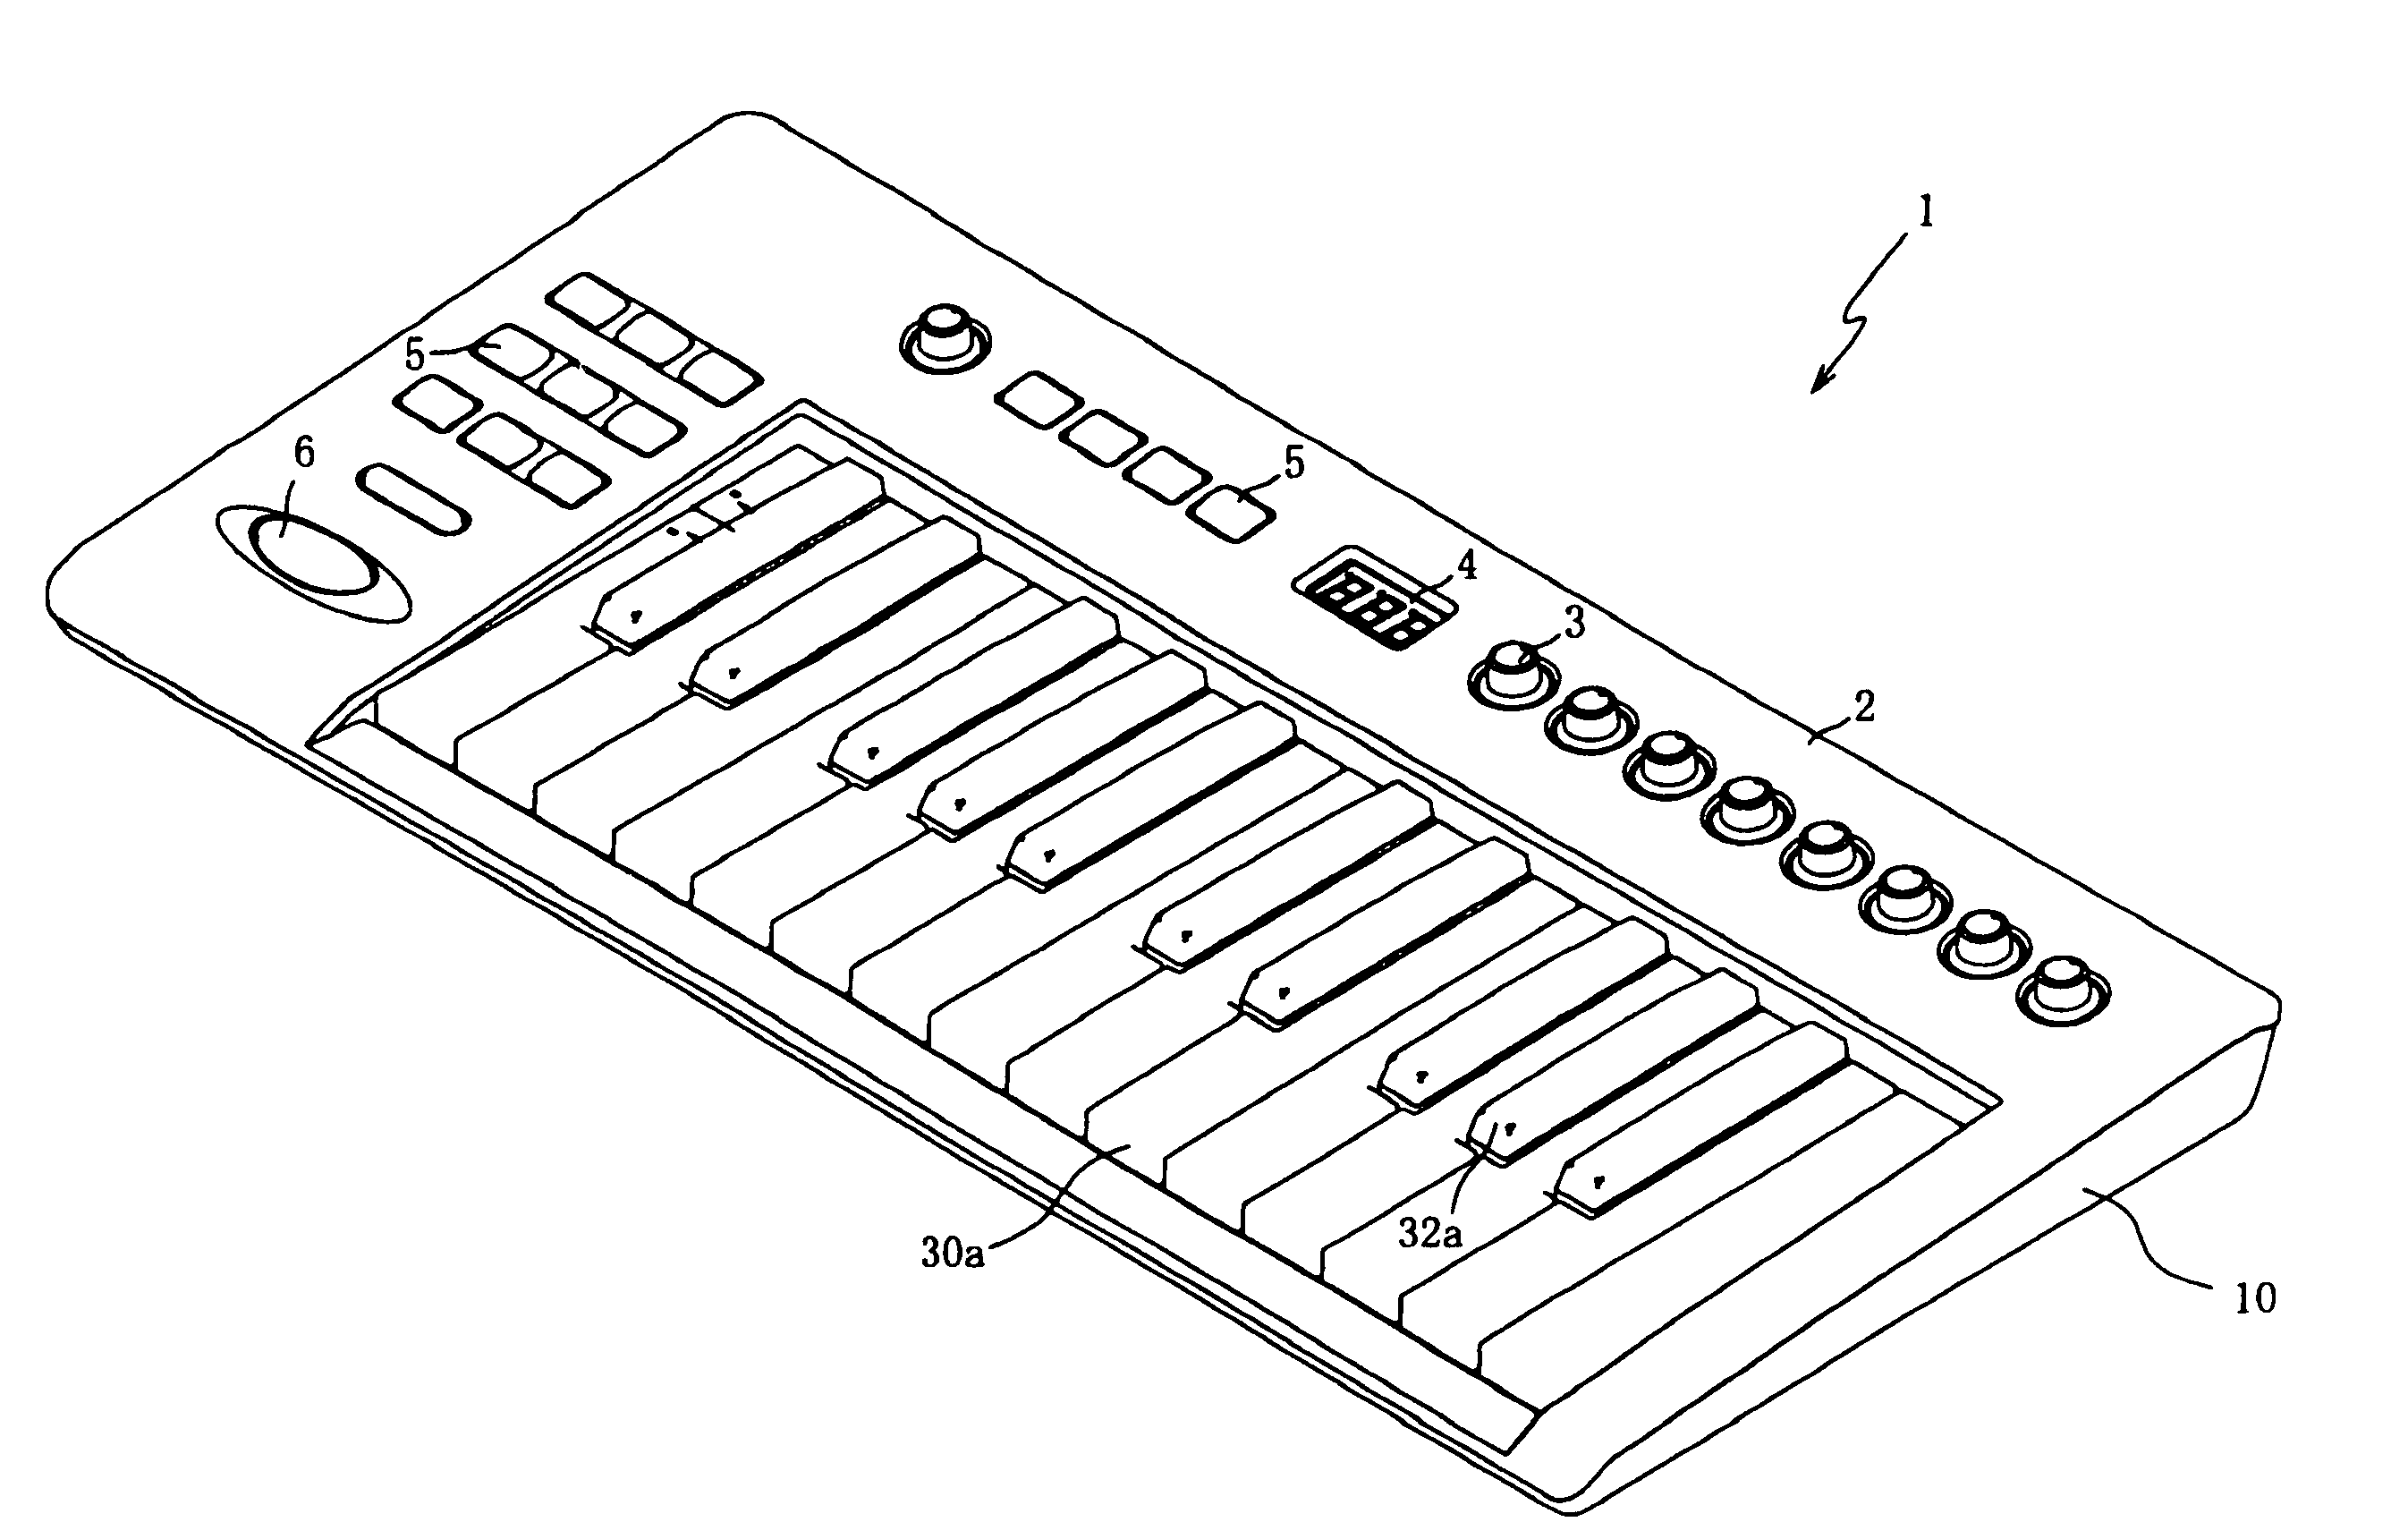 Compact keyboard apparatus with accurate detection of key pressing speed